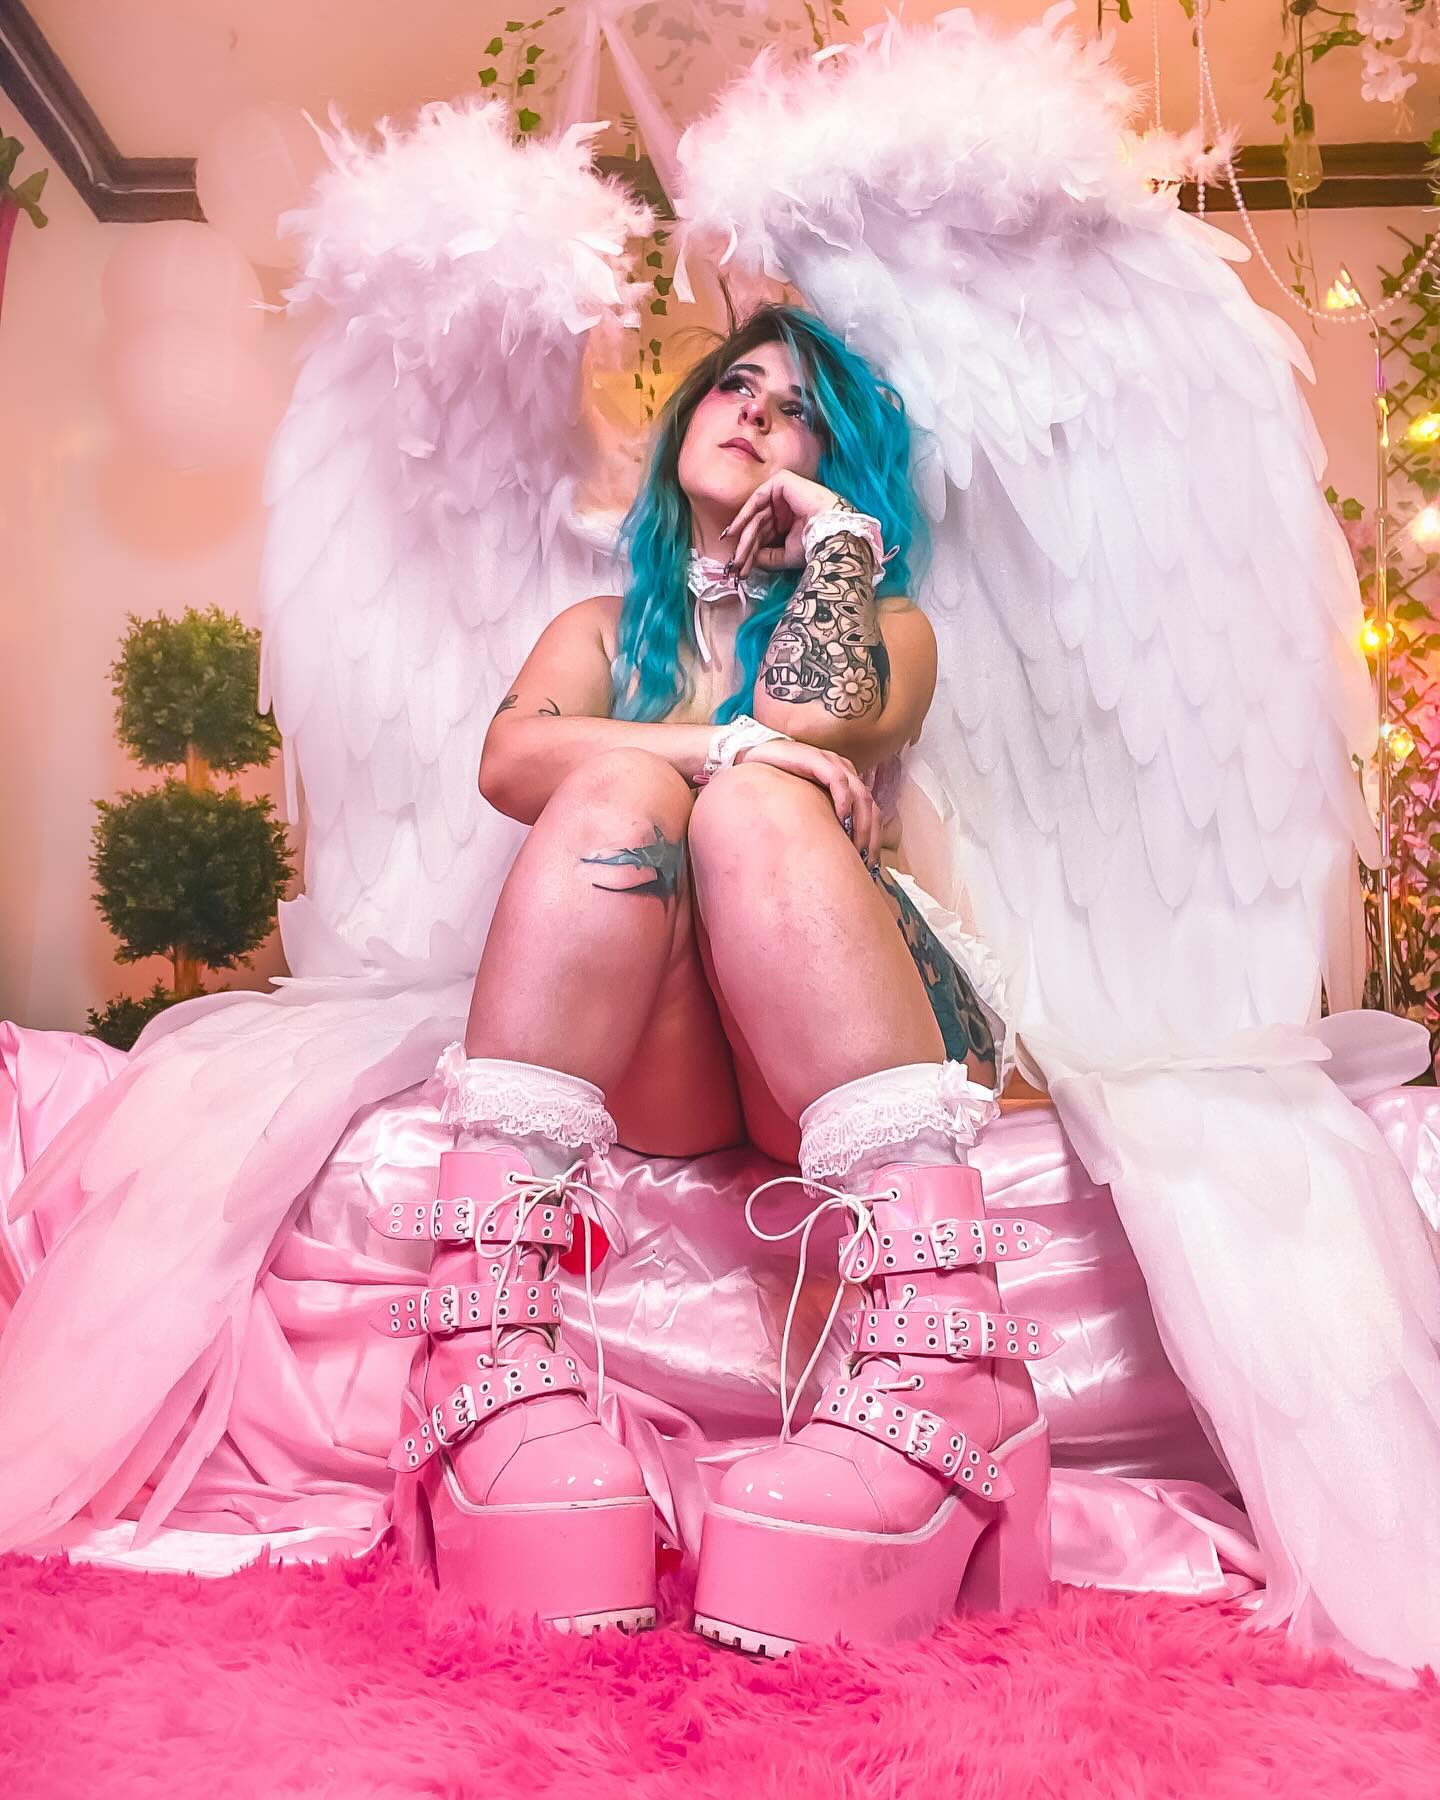 Looking like heaven 😇
Acting like hell 😈
Boots- @yrushoes 
Wings- @thewingsua 
Photography- @got.to.b.me1 
.
#angel #fashion #shoes #boots #altgirl #pastelaesthetic #bluehairdontcare #tattoos